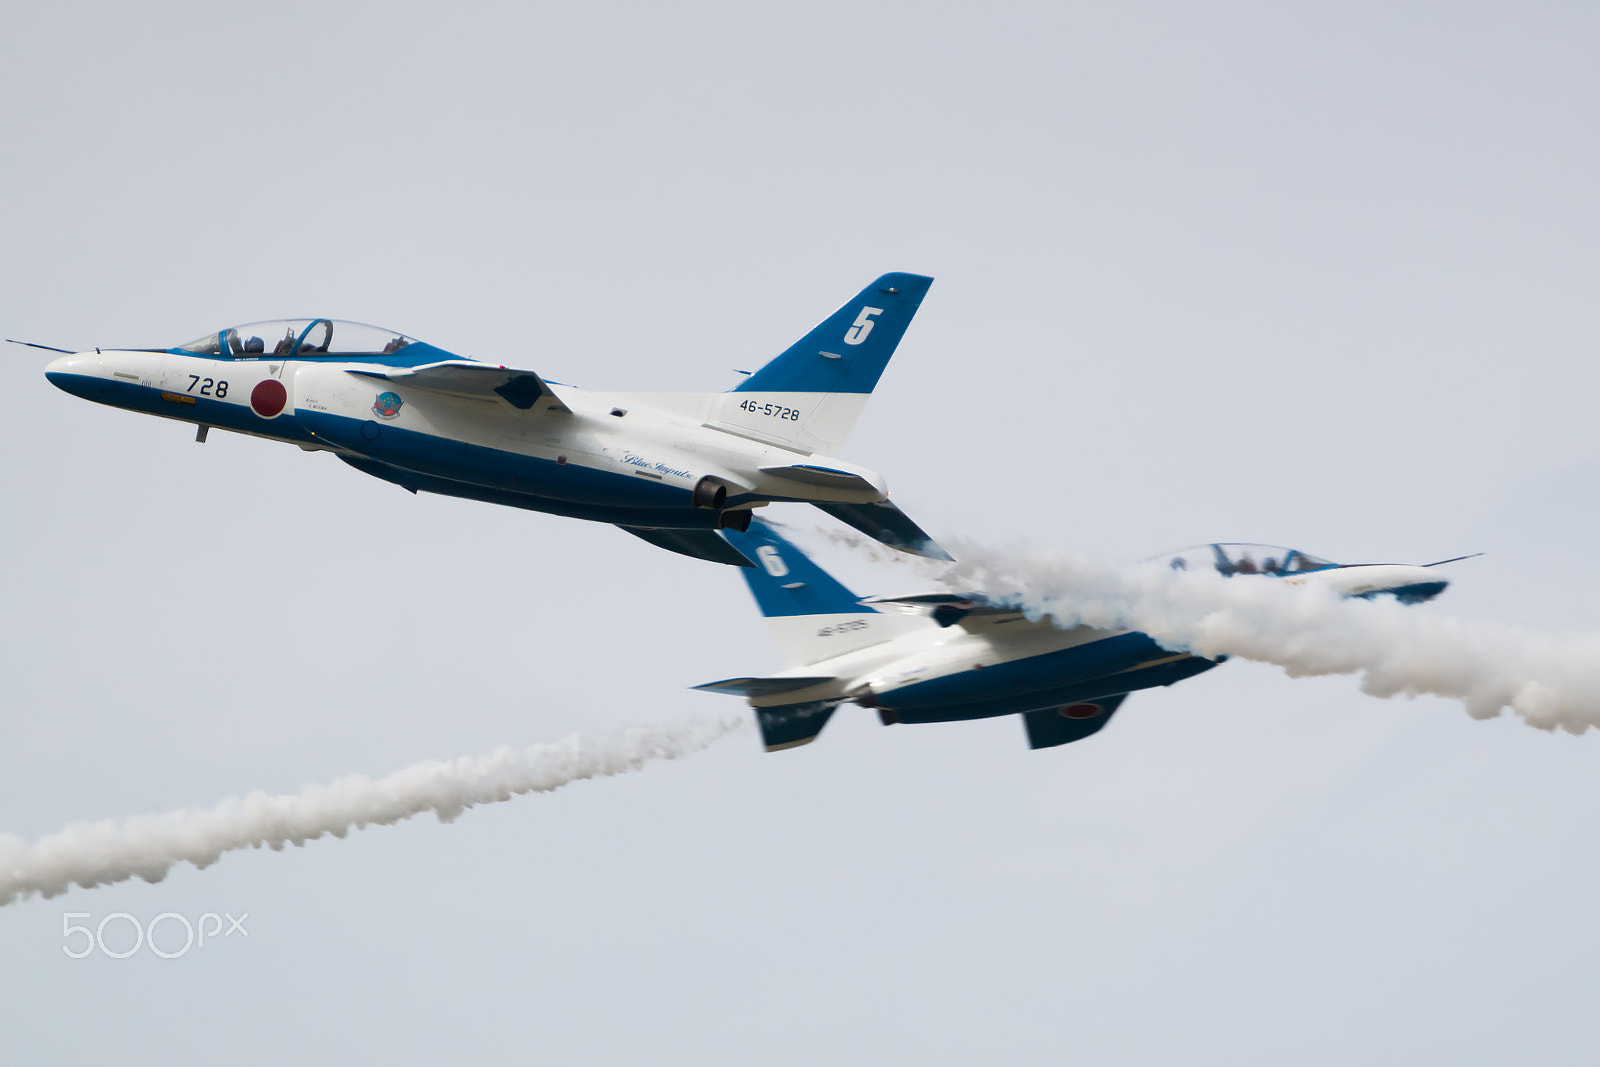 Sony SLT-A57 + Tamron SP 150-600mm F5-6.3 Di VC USD sample photo. Demonstration flights of blue impulse photography